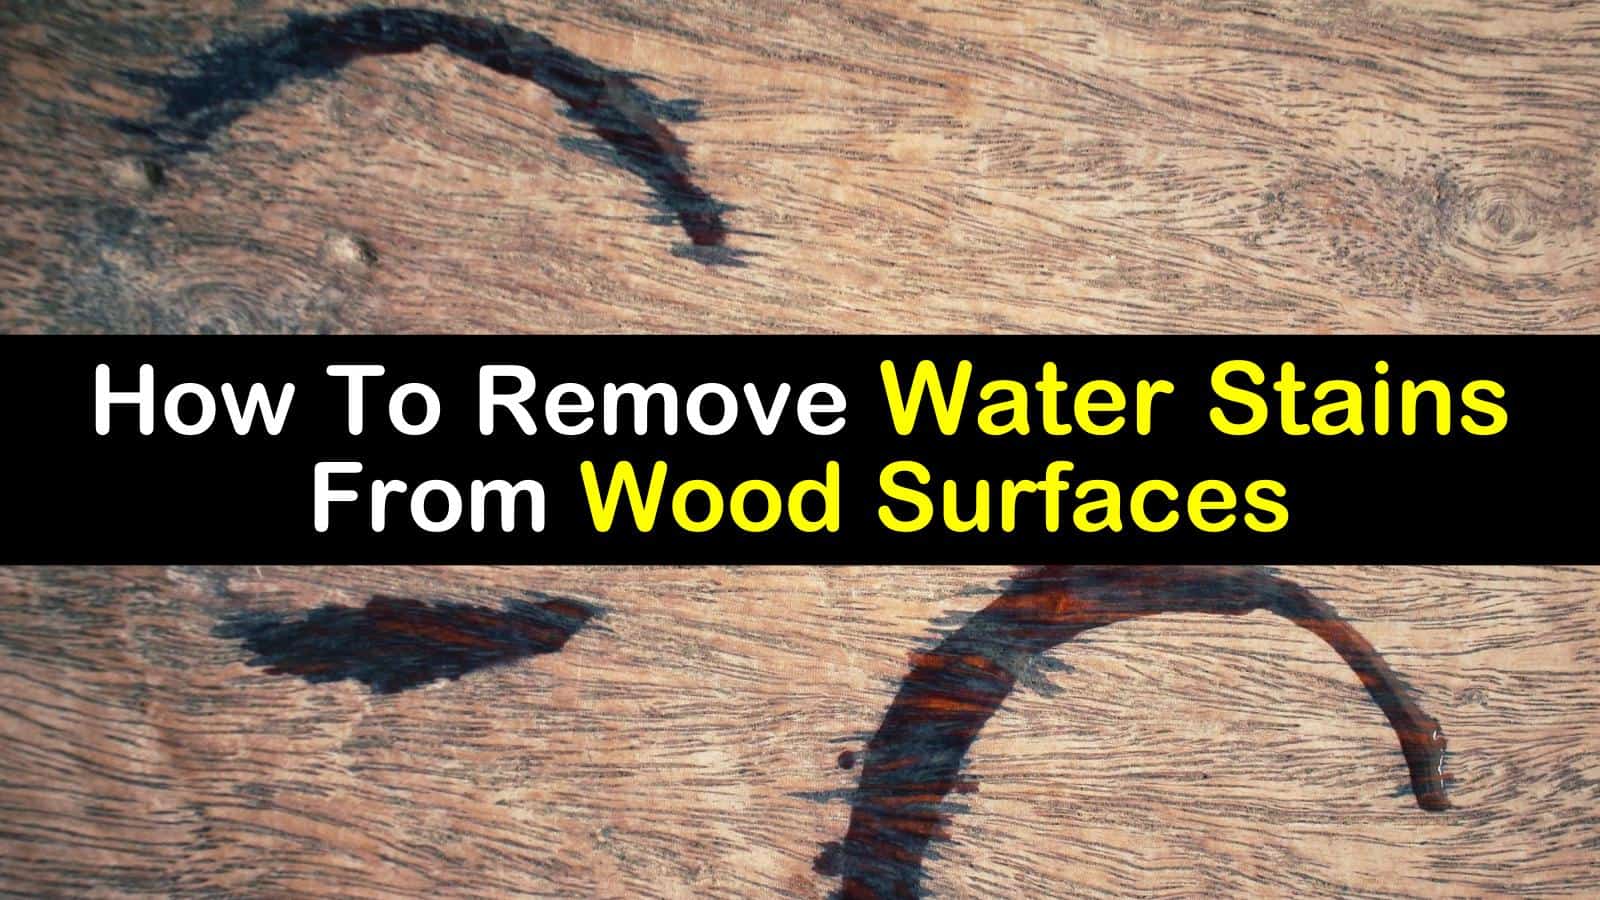 Remove Water Stains From Wood, How To Remove Old Black Water Stains From Hardwood Floors